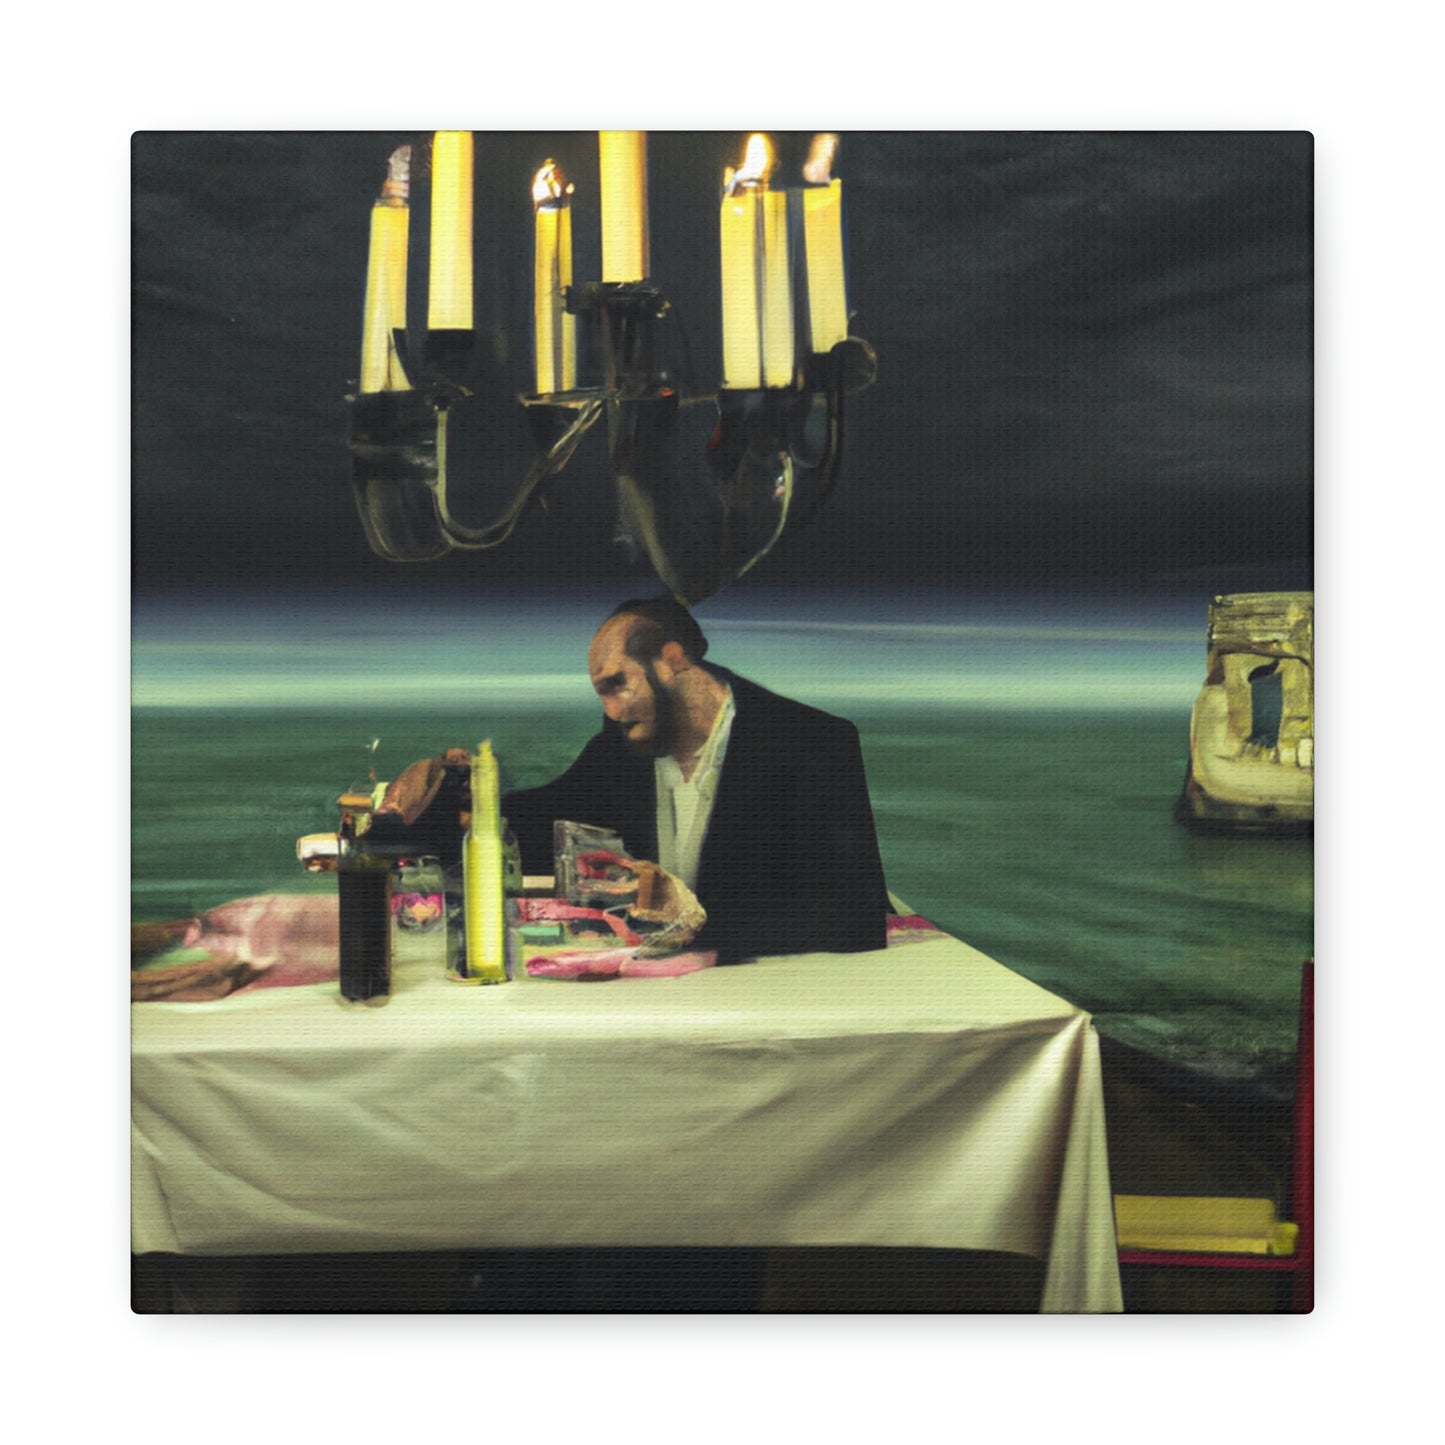 "A Beacon of Romance: An Intimate Candlelit Dinner in a Forgotten Lighthouse" - The Alien Canva